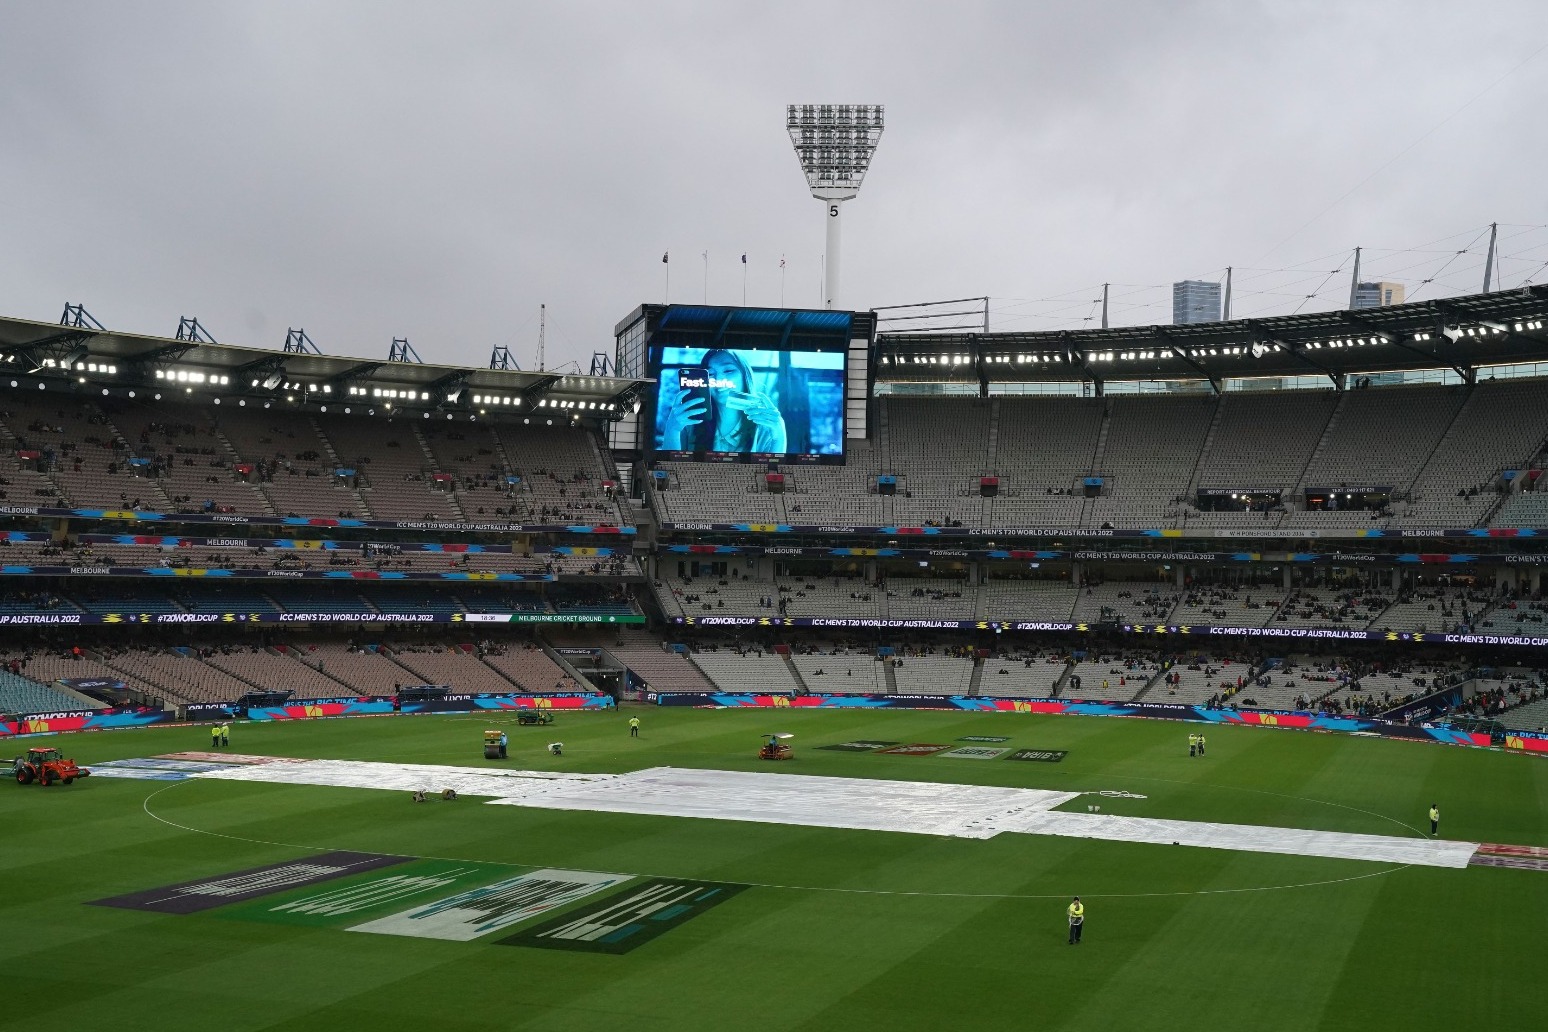 England’s game against Australia in serious doubt due to rain in Melbourne 